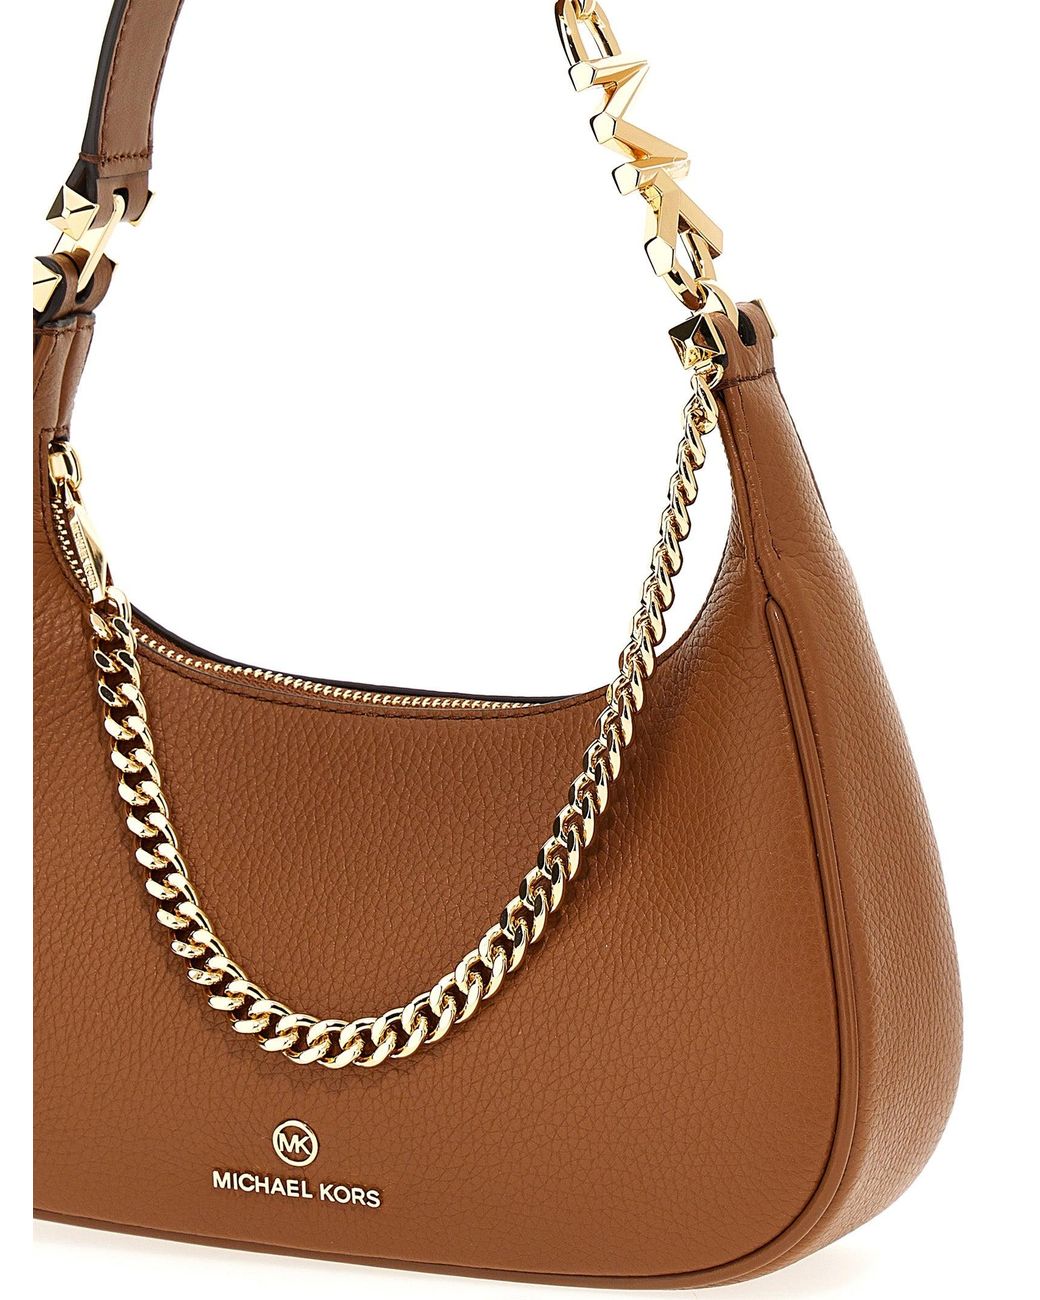 Michael Kors Women s hand bags Bags & Purses for sale & price in Ethiopia -  Search Results | Engocha.com